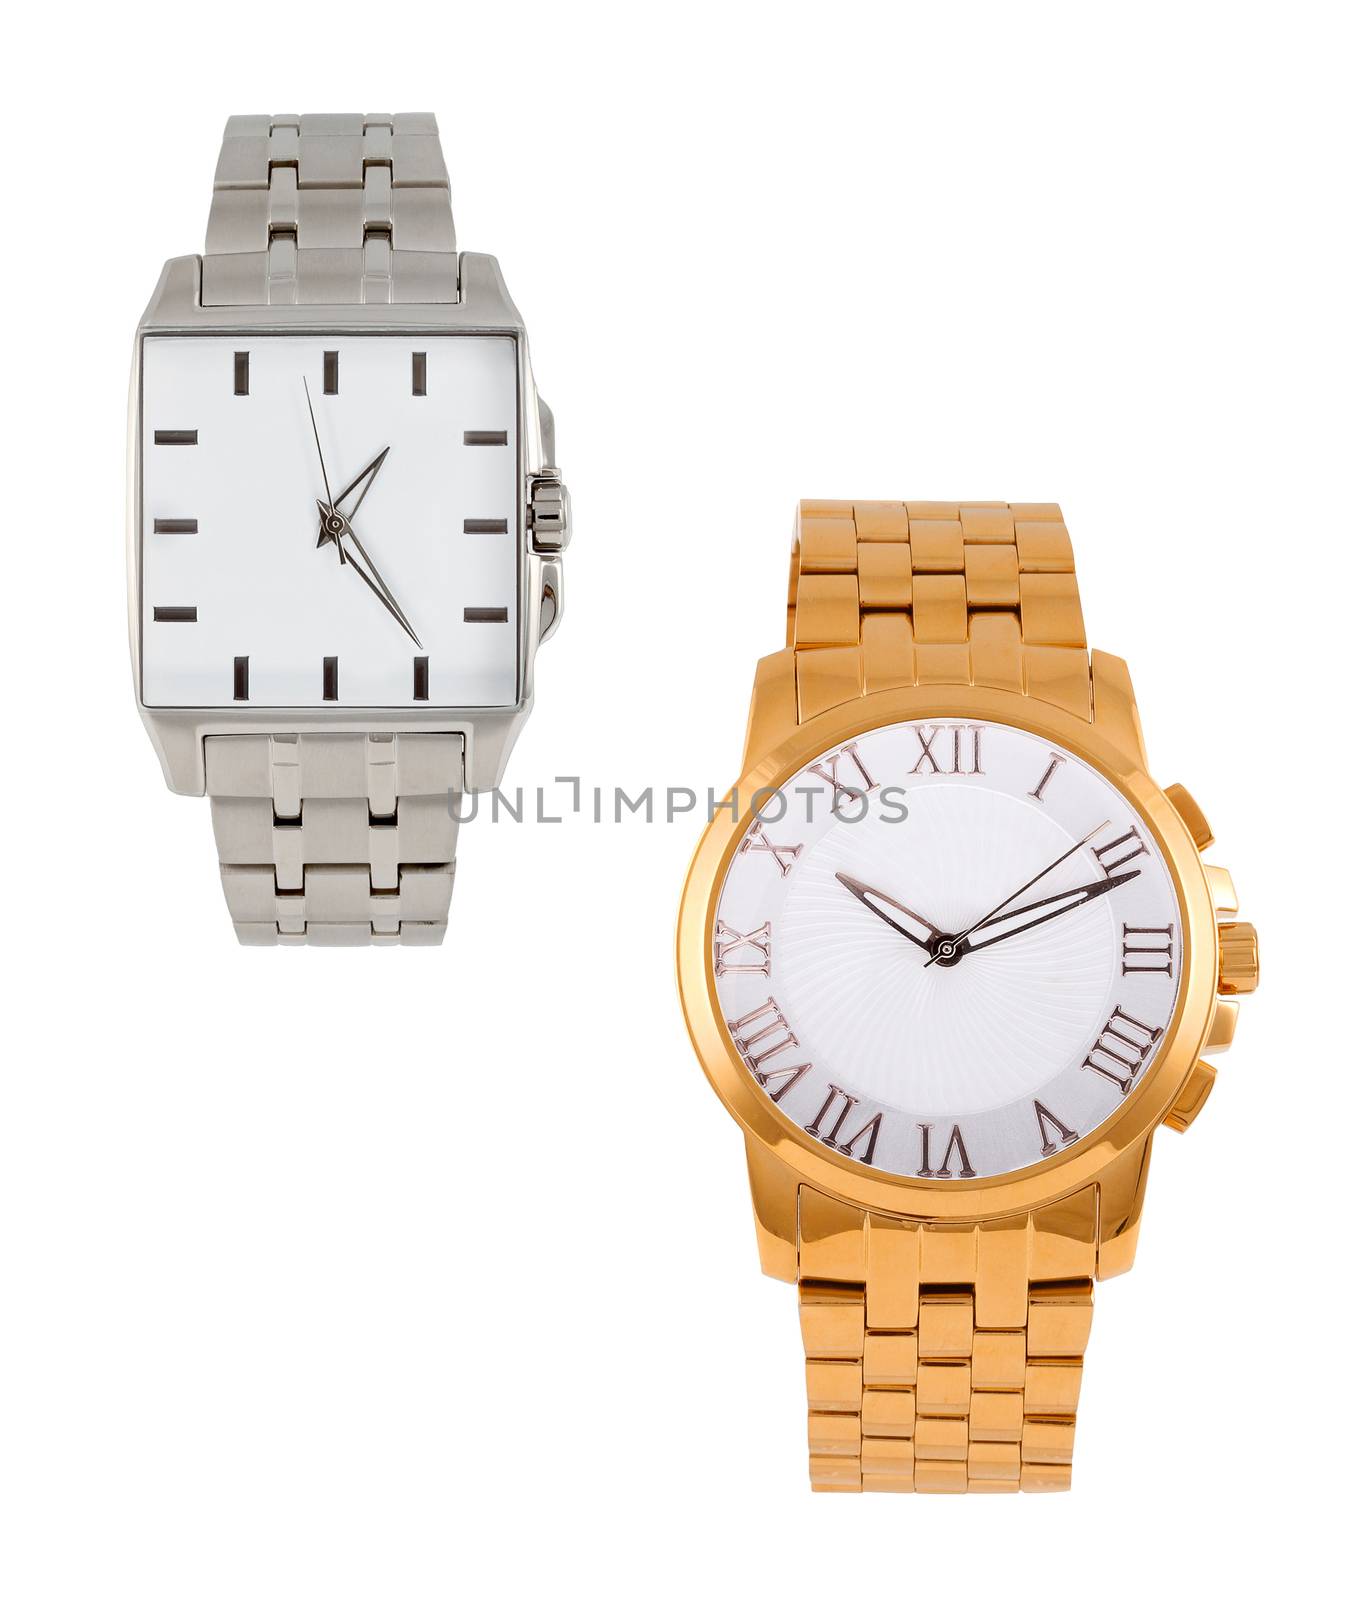 golden and silver modern wrist watch isolated